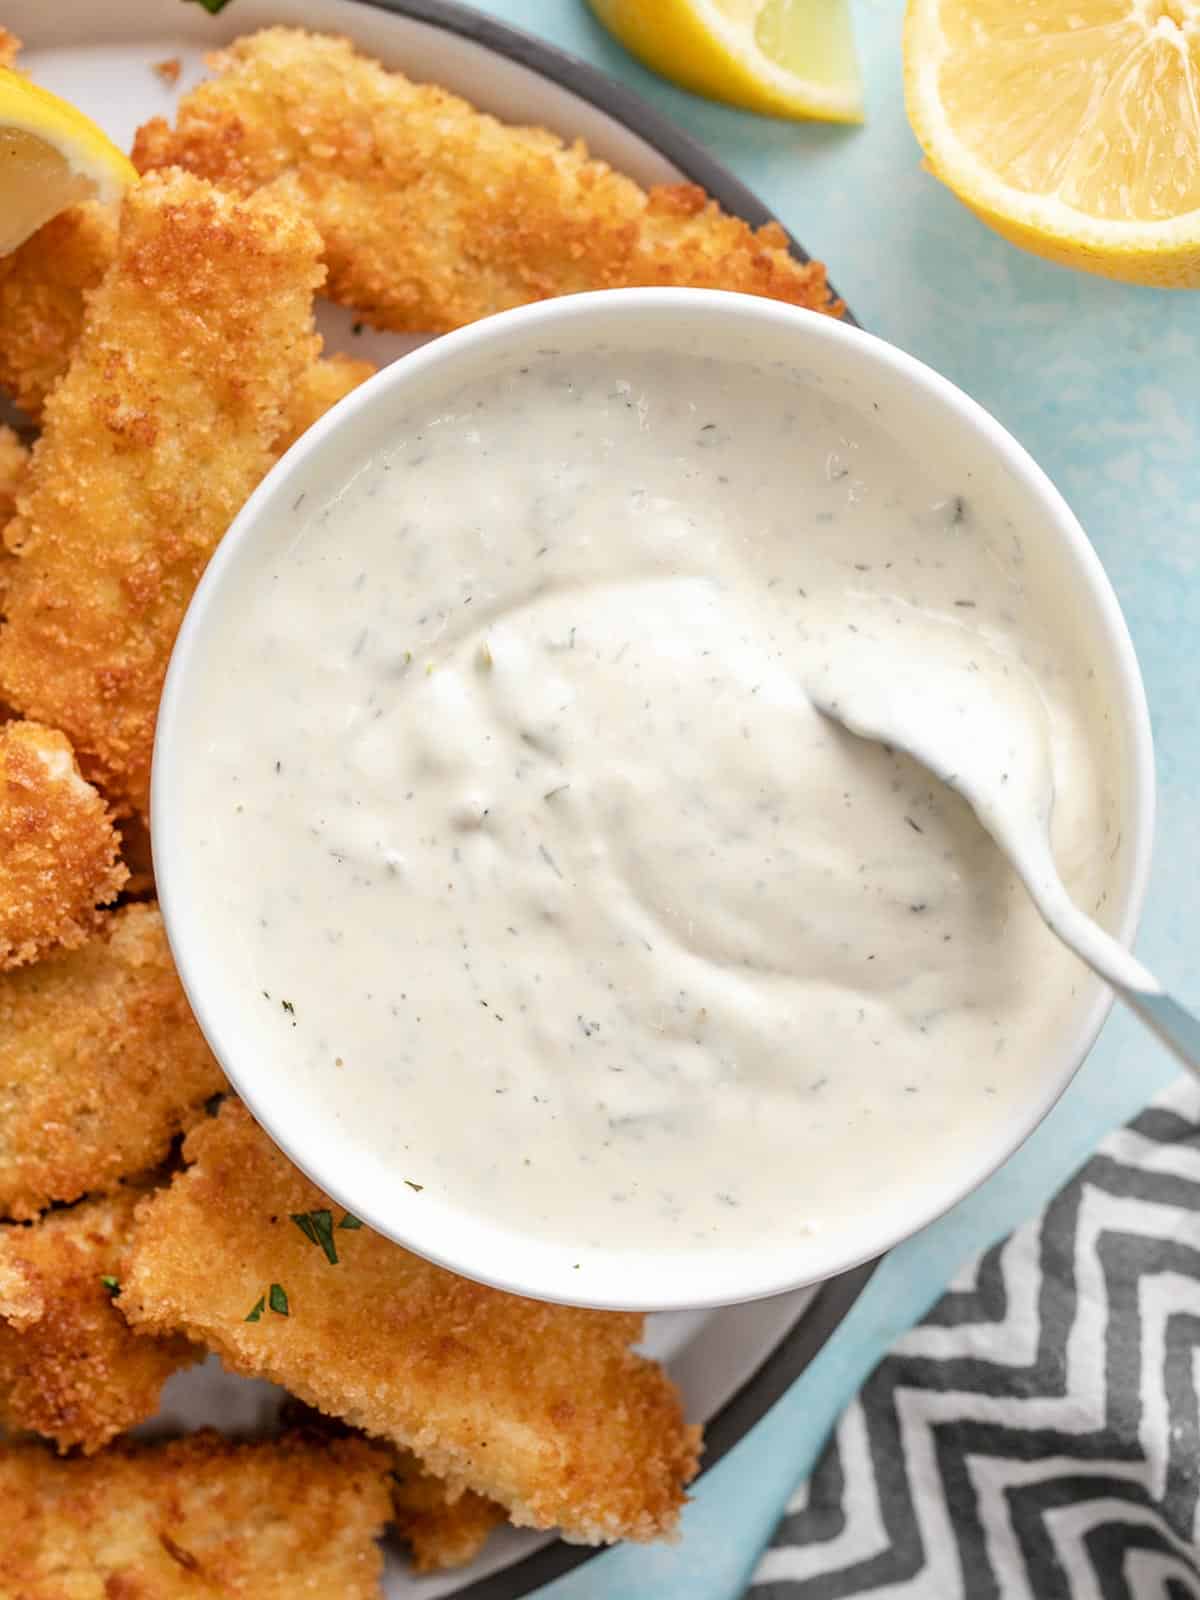 Overhead view of a bowl of tartar sauce on a plate of fish sticks, being stirred with a spoon.